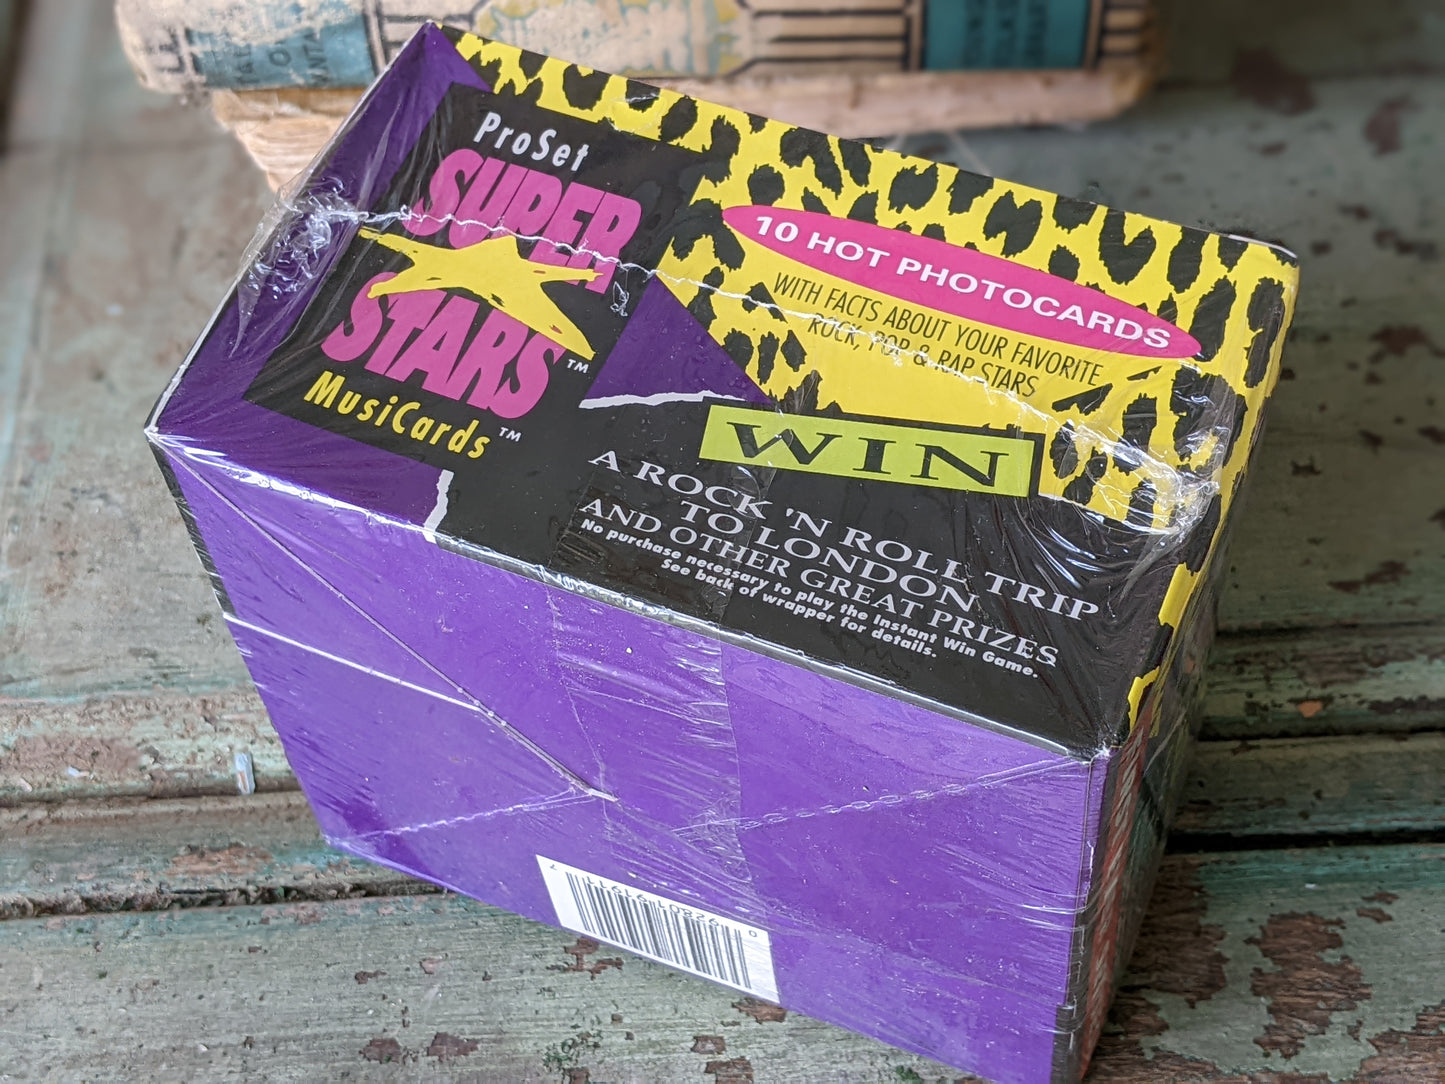 1991 Sealed Pro Set Music Superstars Musicards Series 1 Trading Card Box 36 Packs !! Amazing Vintage Artists & Memories !! Box Only !!